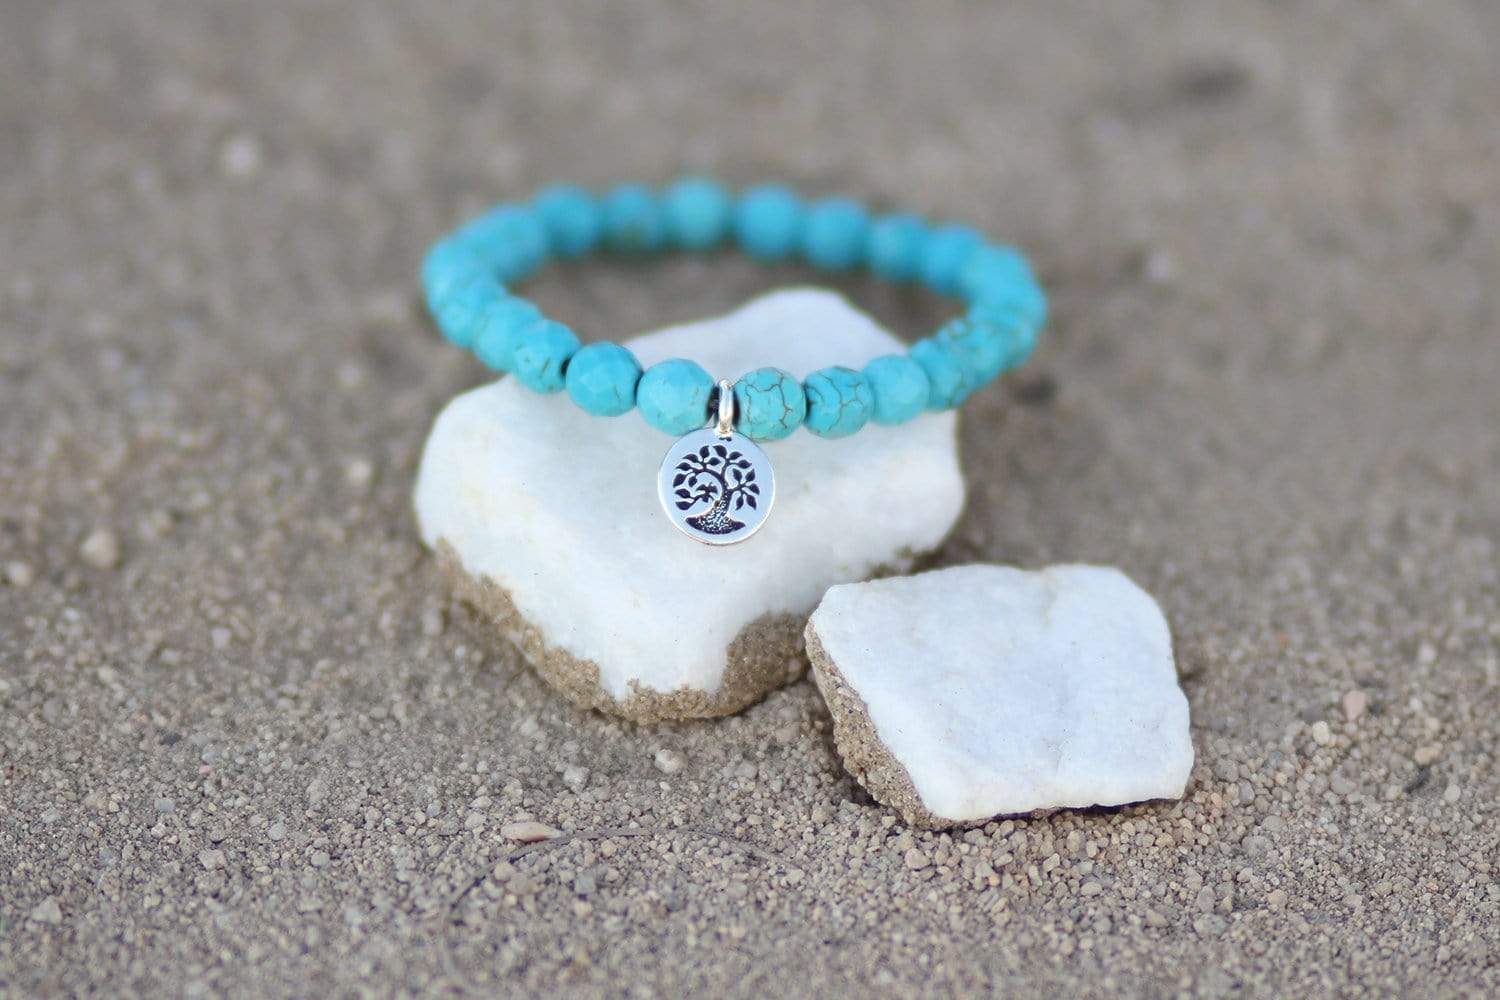 Simple and clean MaeMae Custom Stone Bracelet using Turquoise and silver Joshua Tree charm.